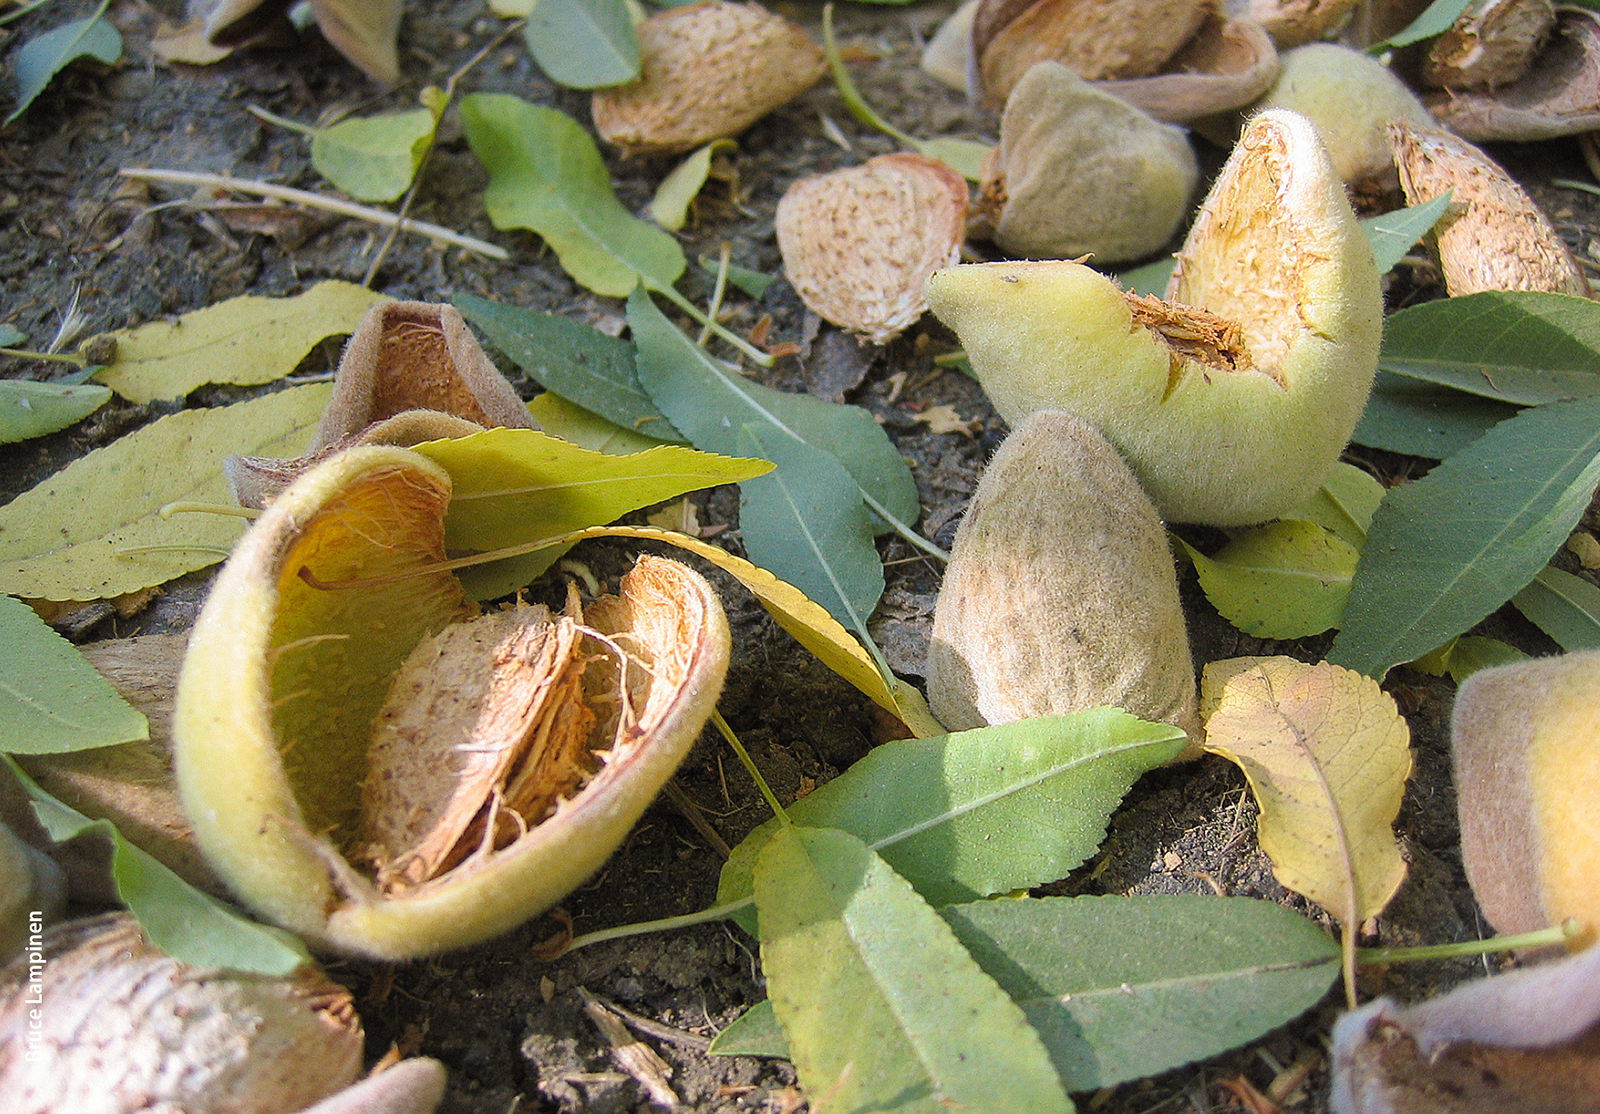 Almond nuts and hulls at harvest time.